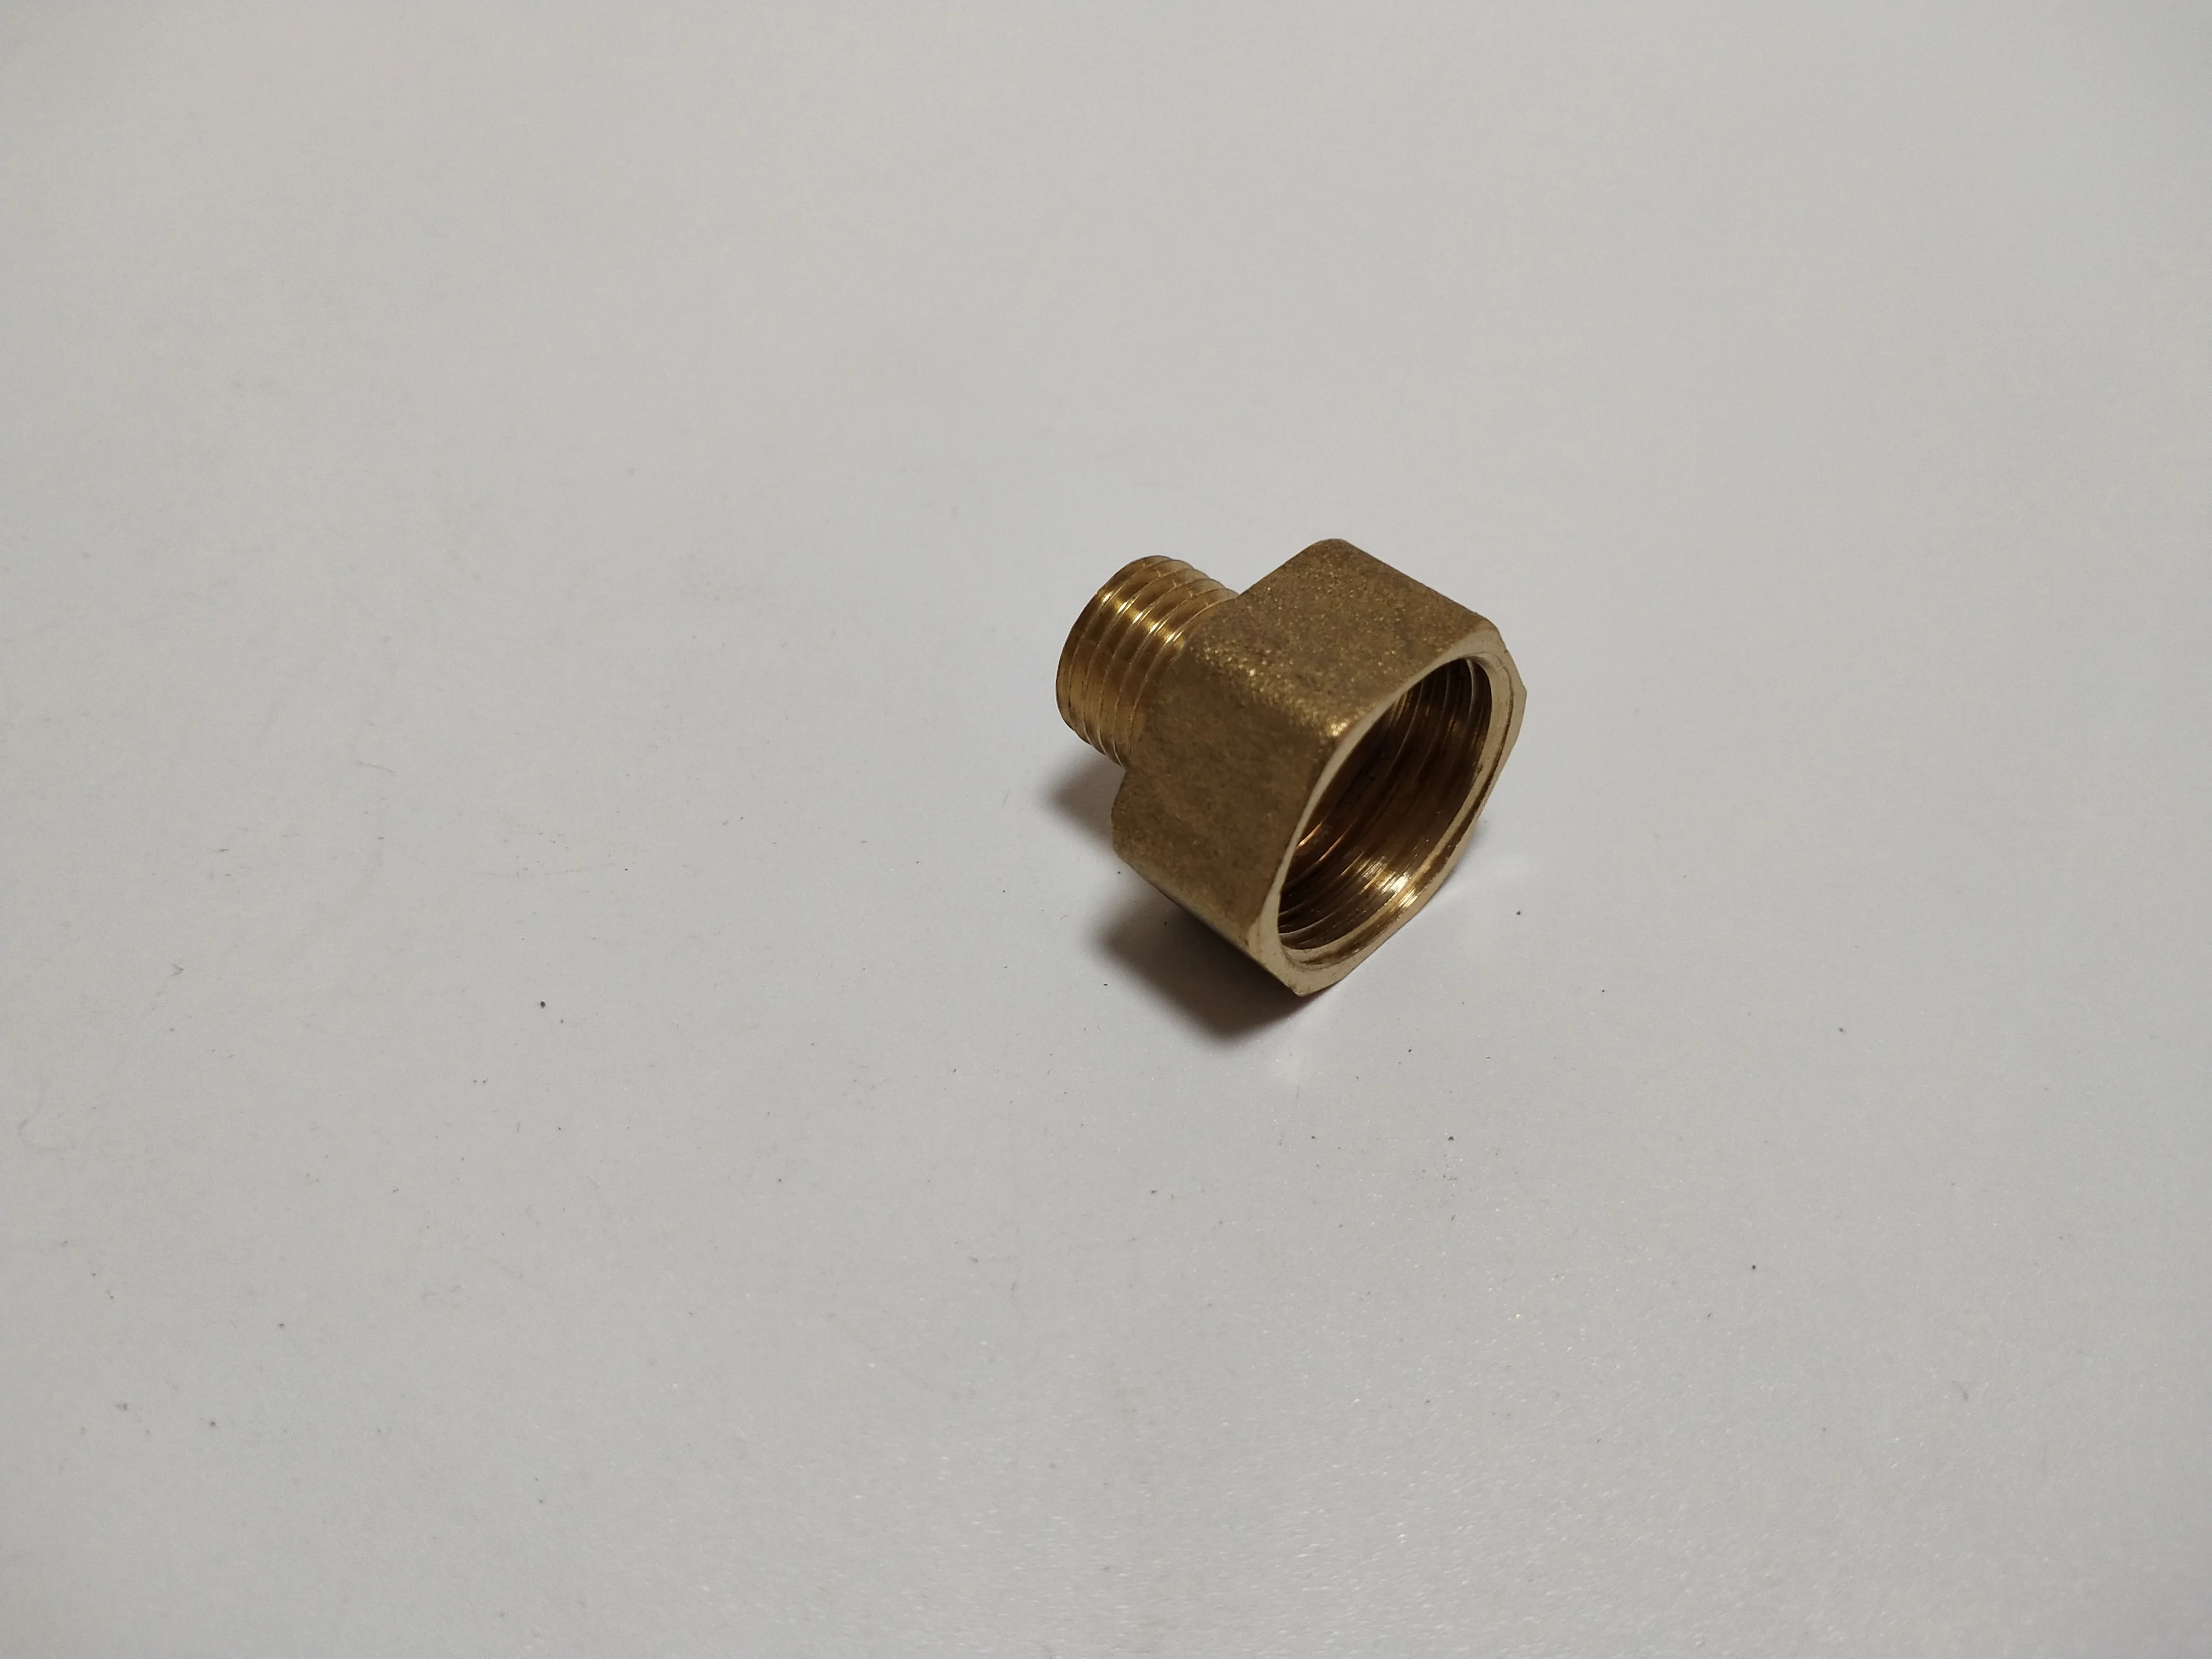 3/4" NPT to 1/2" Pipe Bushing Adapter Convert 1/2 Male to 3/4 Male Solid Brassx5 